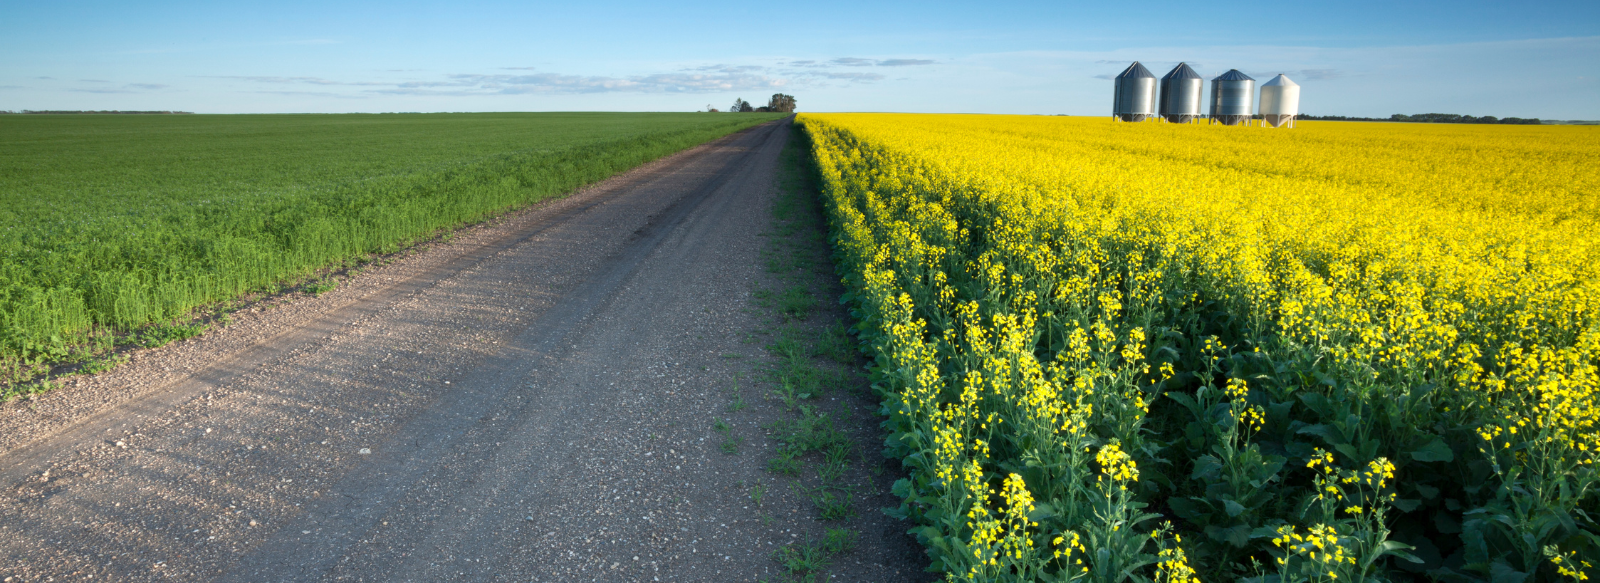 road with scenic canola field 